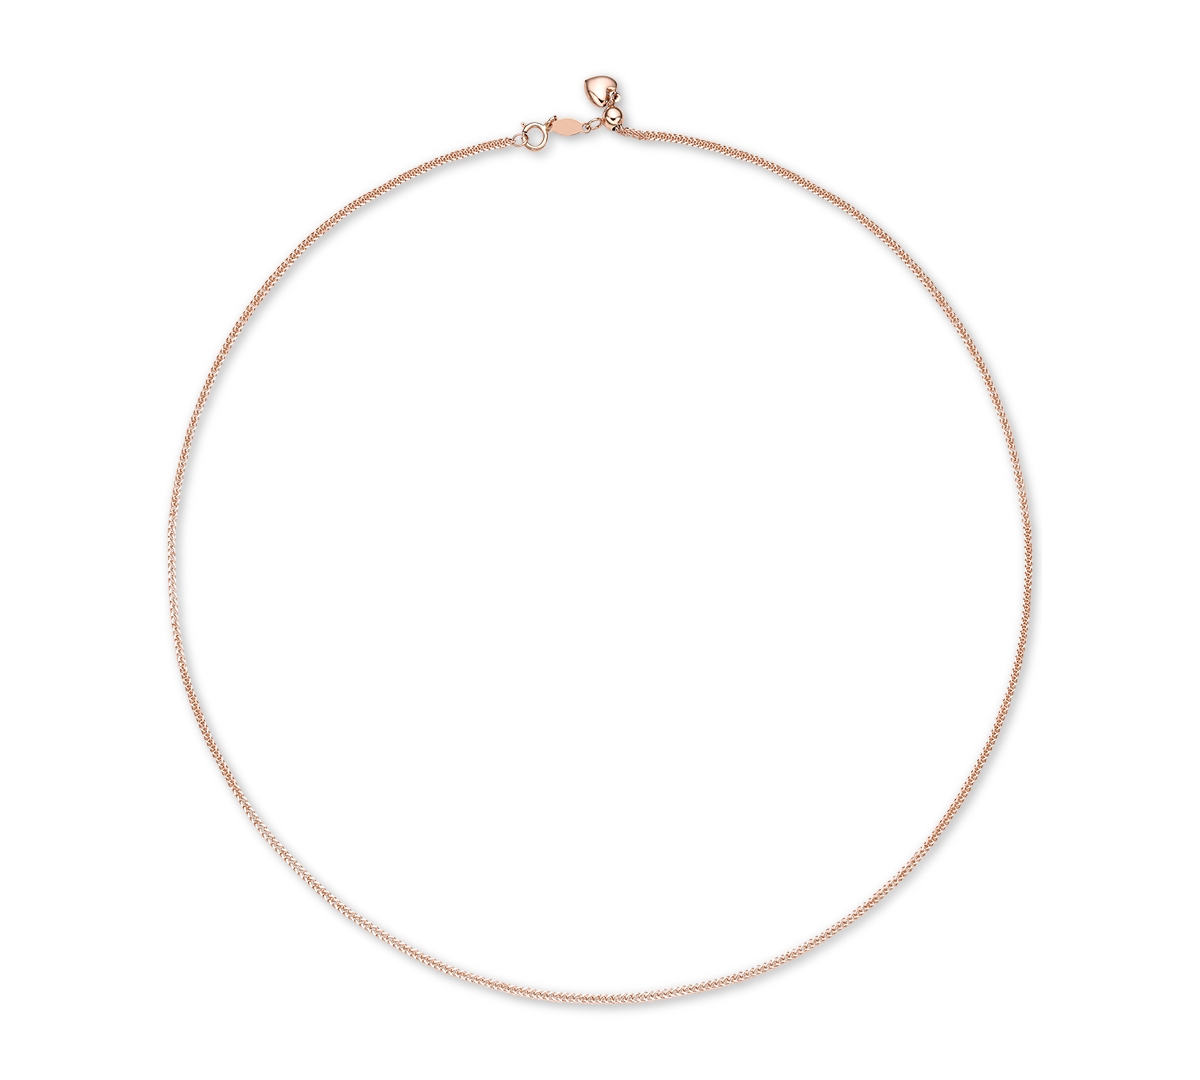 Wheat Link 18" Chain Necklace in 18k White Gold or 18k Rose Gold - Rose Gold